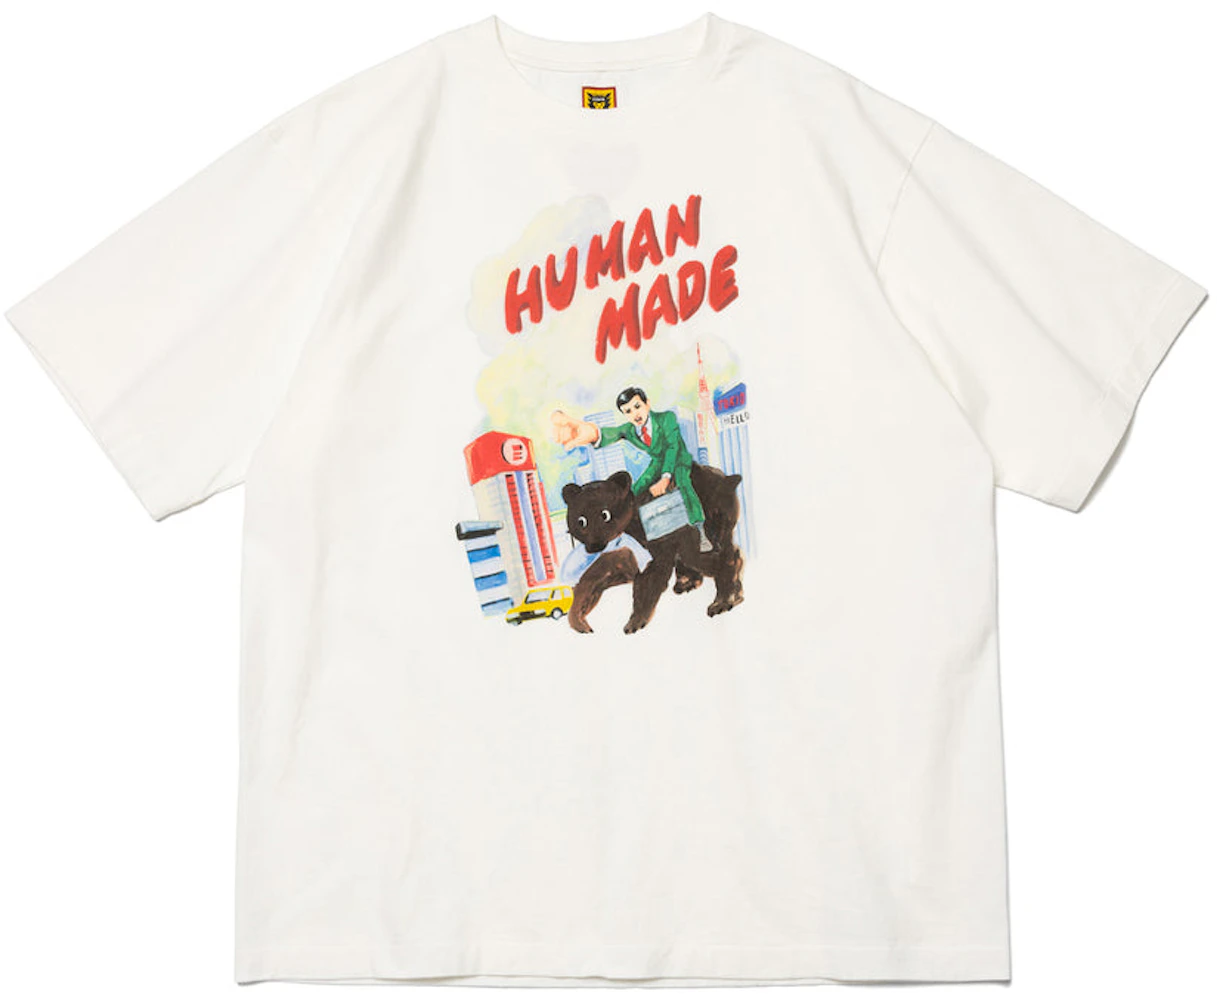 https://images.stockx.com/images/Human-Made-Keiko-Sootome-7-T-Shirt-White.jpg?fit=fill&bg=FFFFFF&w=700&h=500&fm=webp&auto=compress&q=90&dpr=2&trim=color&updated_at=1680708547?height=78&width=78